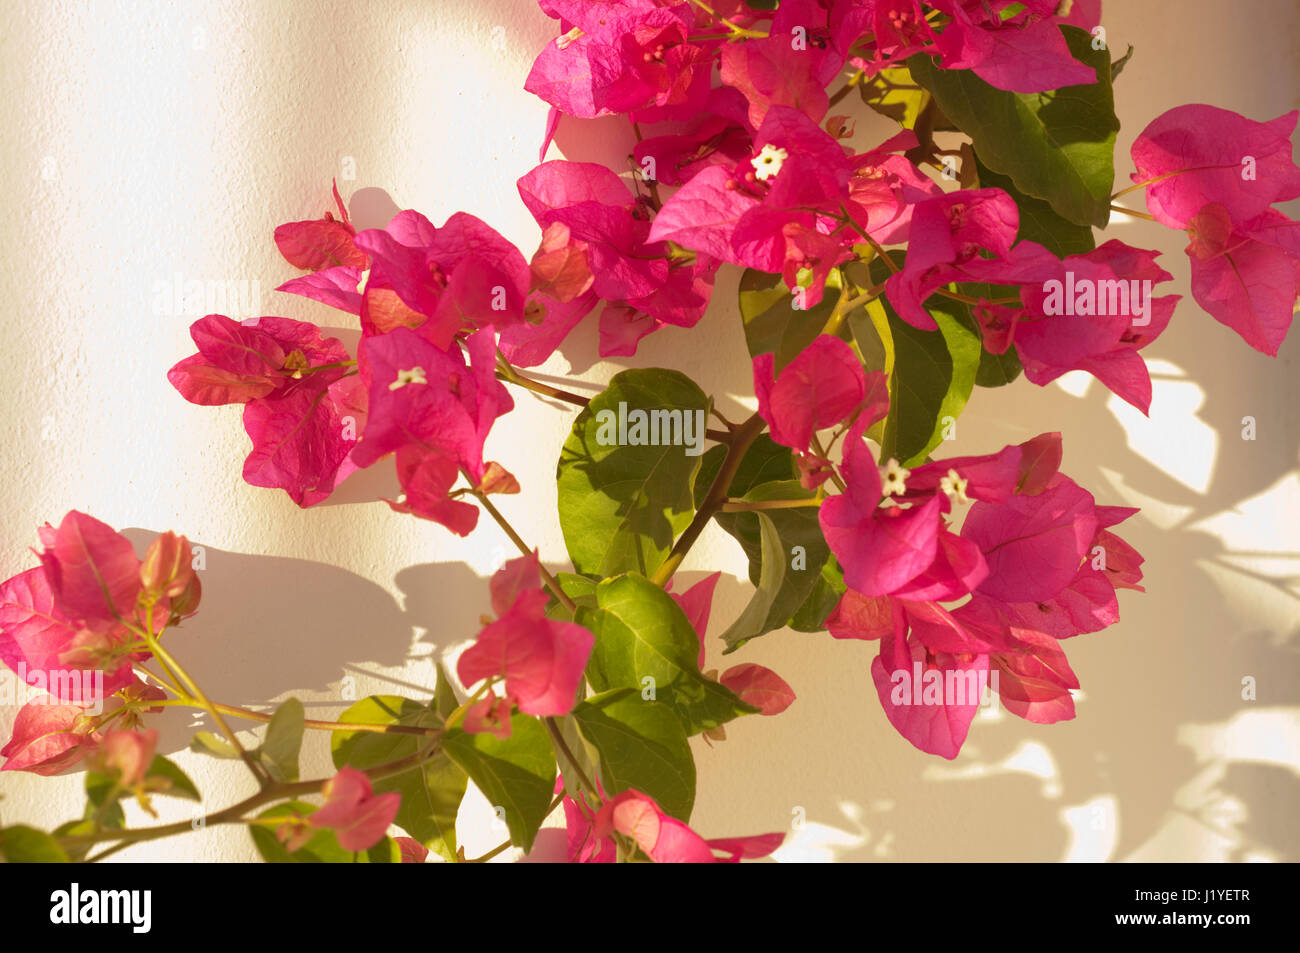 The flowers of Bougainvillea spectabilis against the reflected sunlight of a while painted wall Stock Photo